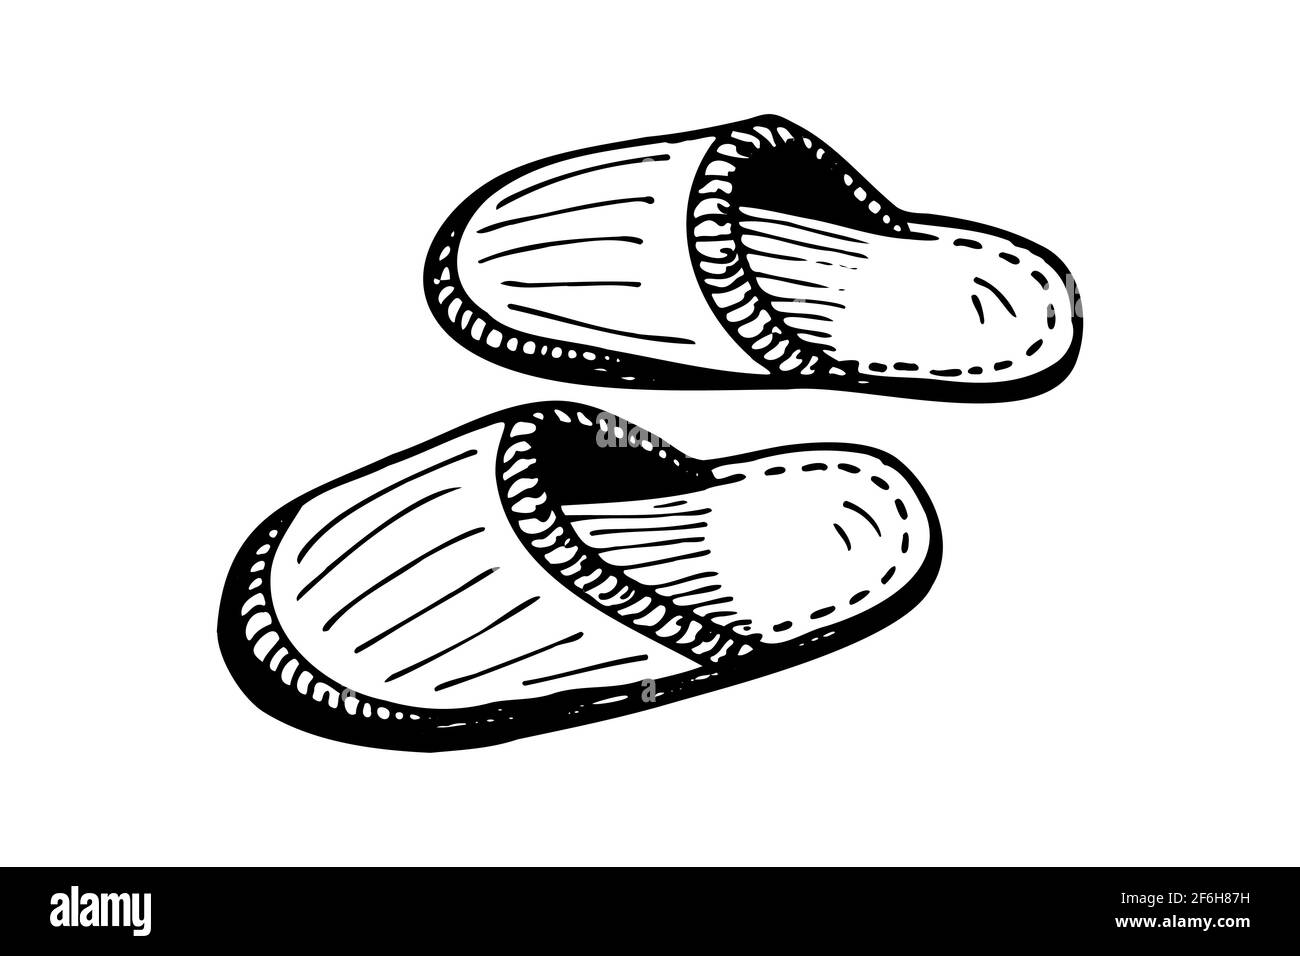 Pair slippers Black and White Stock Photos & Images - Alamy